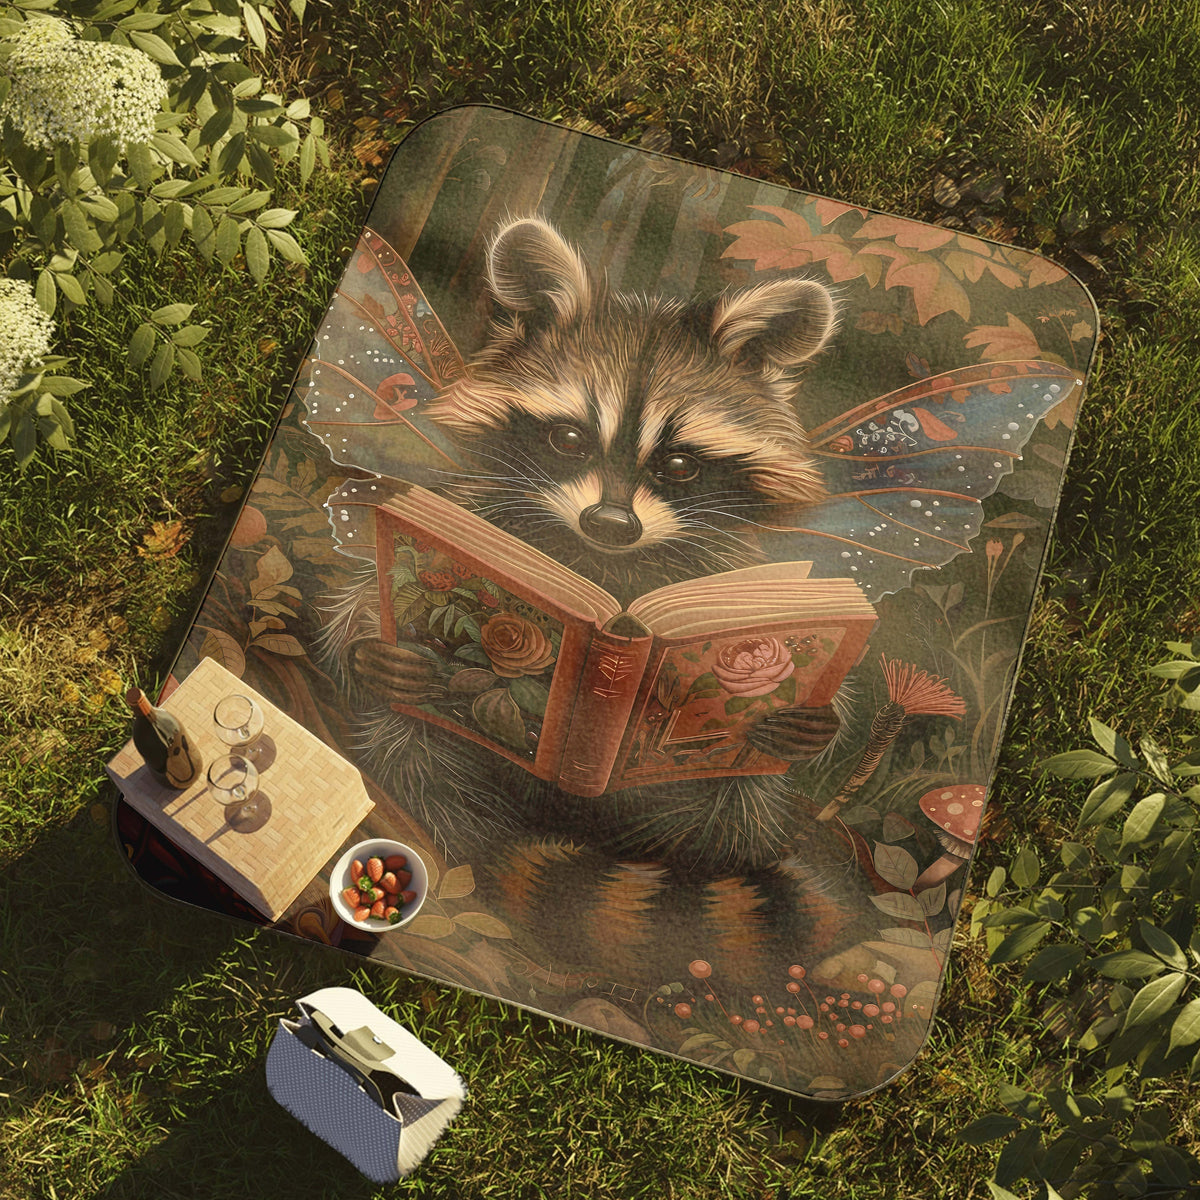 a raccoon is reading a book on the grass